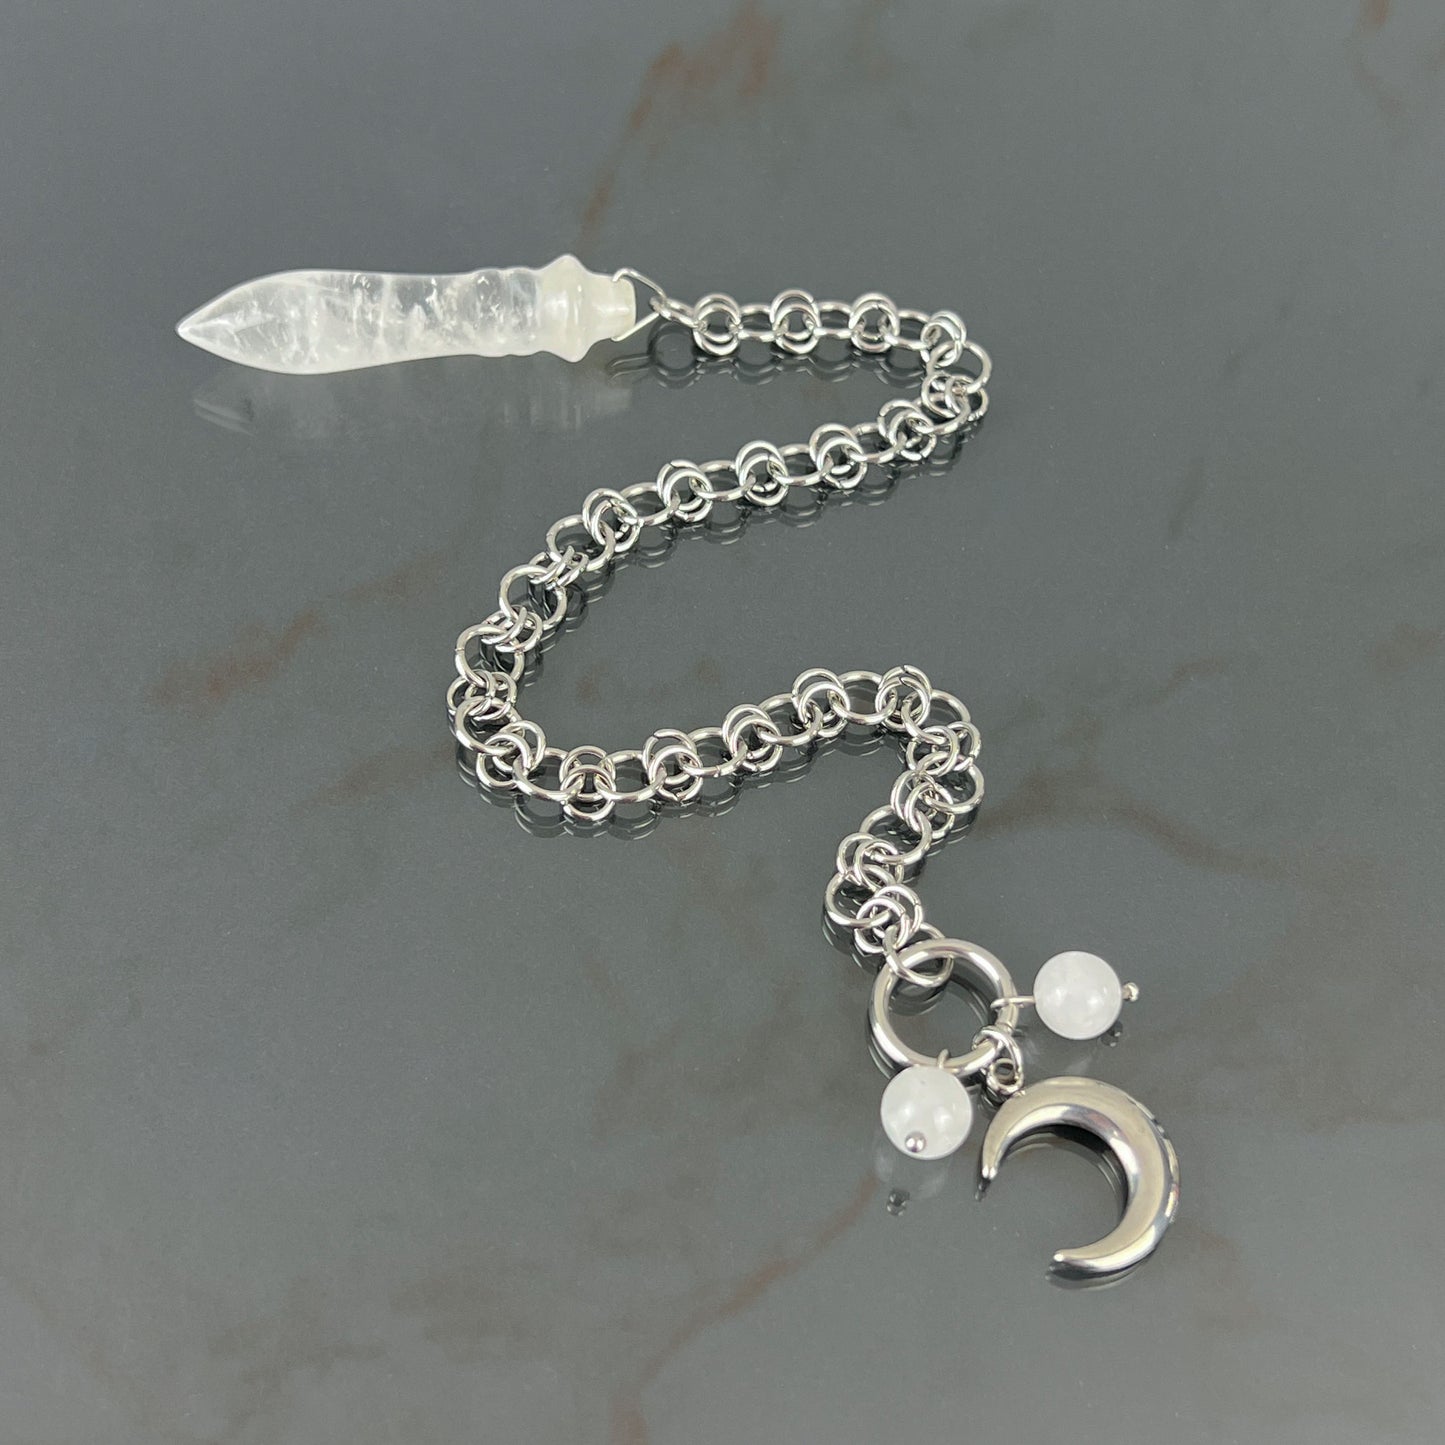 Egyptian Thot pendulum quartz chainmail, crescent moon and stainless steel